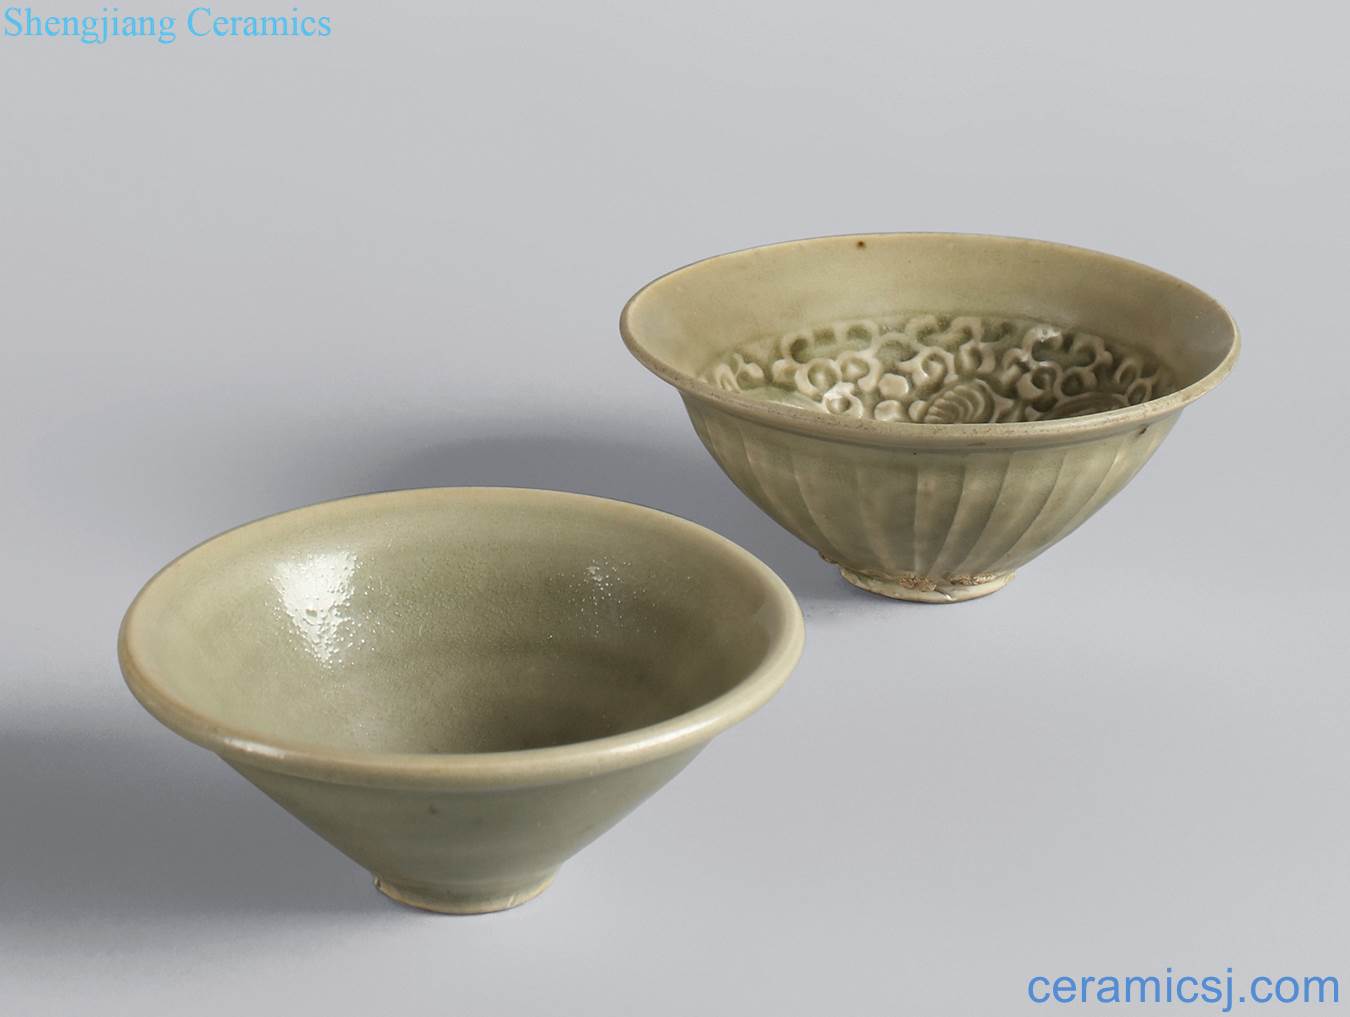 Northern song dynasty (960-1127) and gold (1115-1234), yao state kiln green glaze small bowl, stamps chrysanthemum lines around branches small bowl (a set of two)